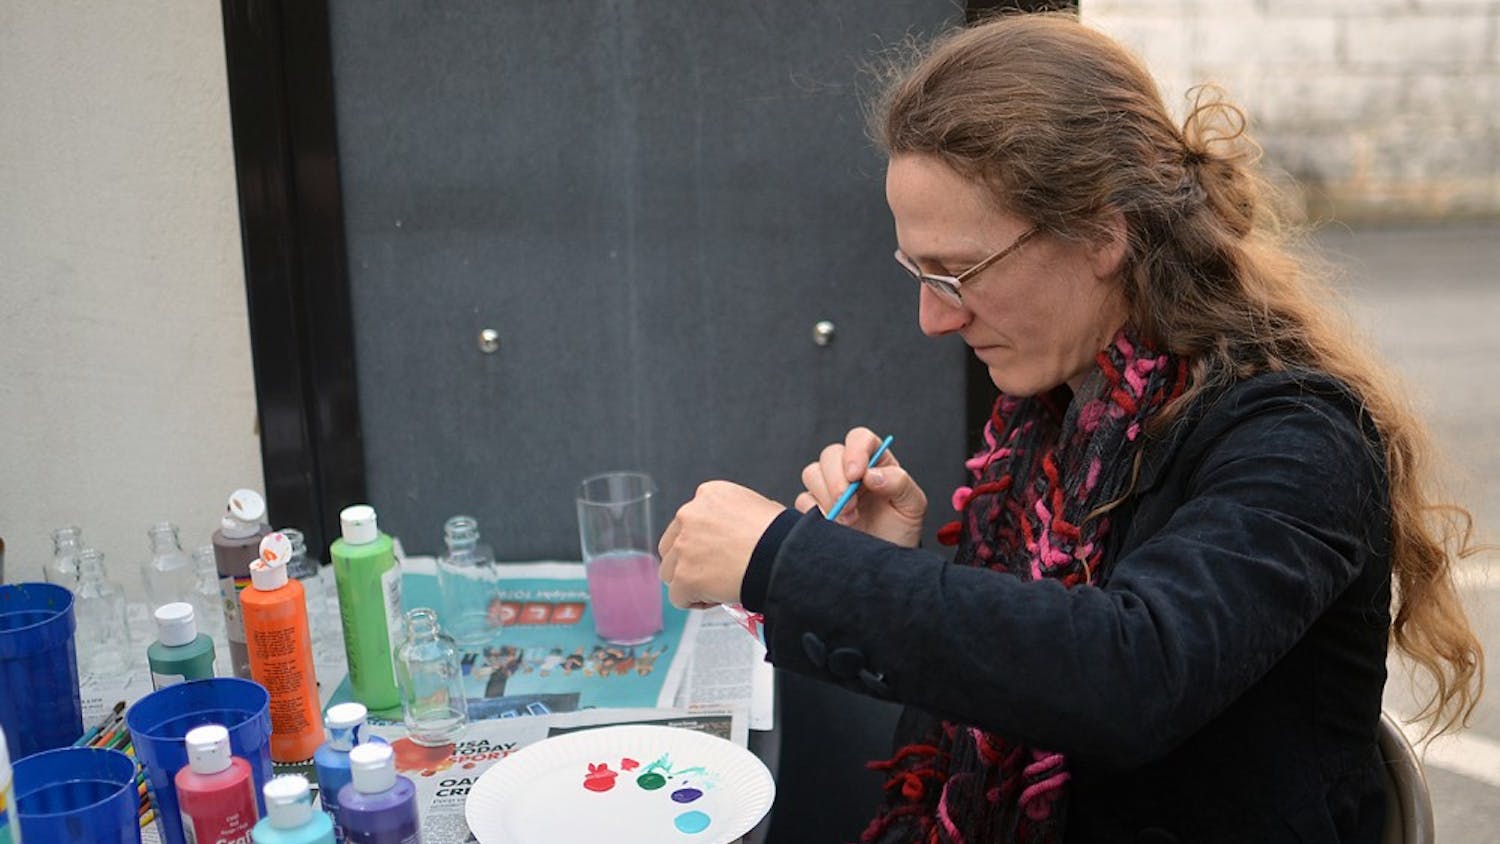 Sarah Wolfe, a resident of Durham, enjoys painting a glass bottle at Lantern Restaurant. She is a curator for Windows in the Chapel Hill area.